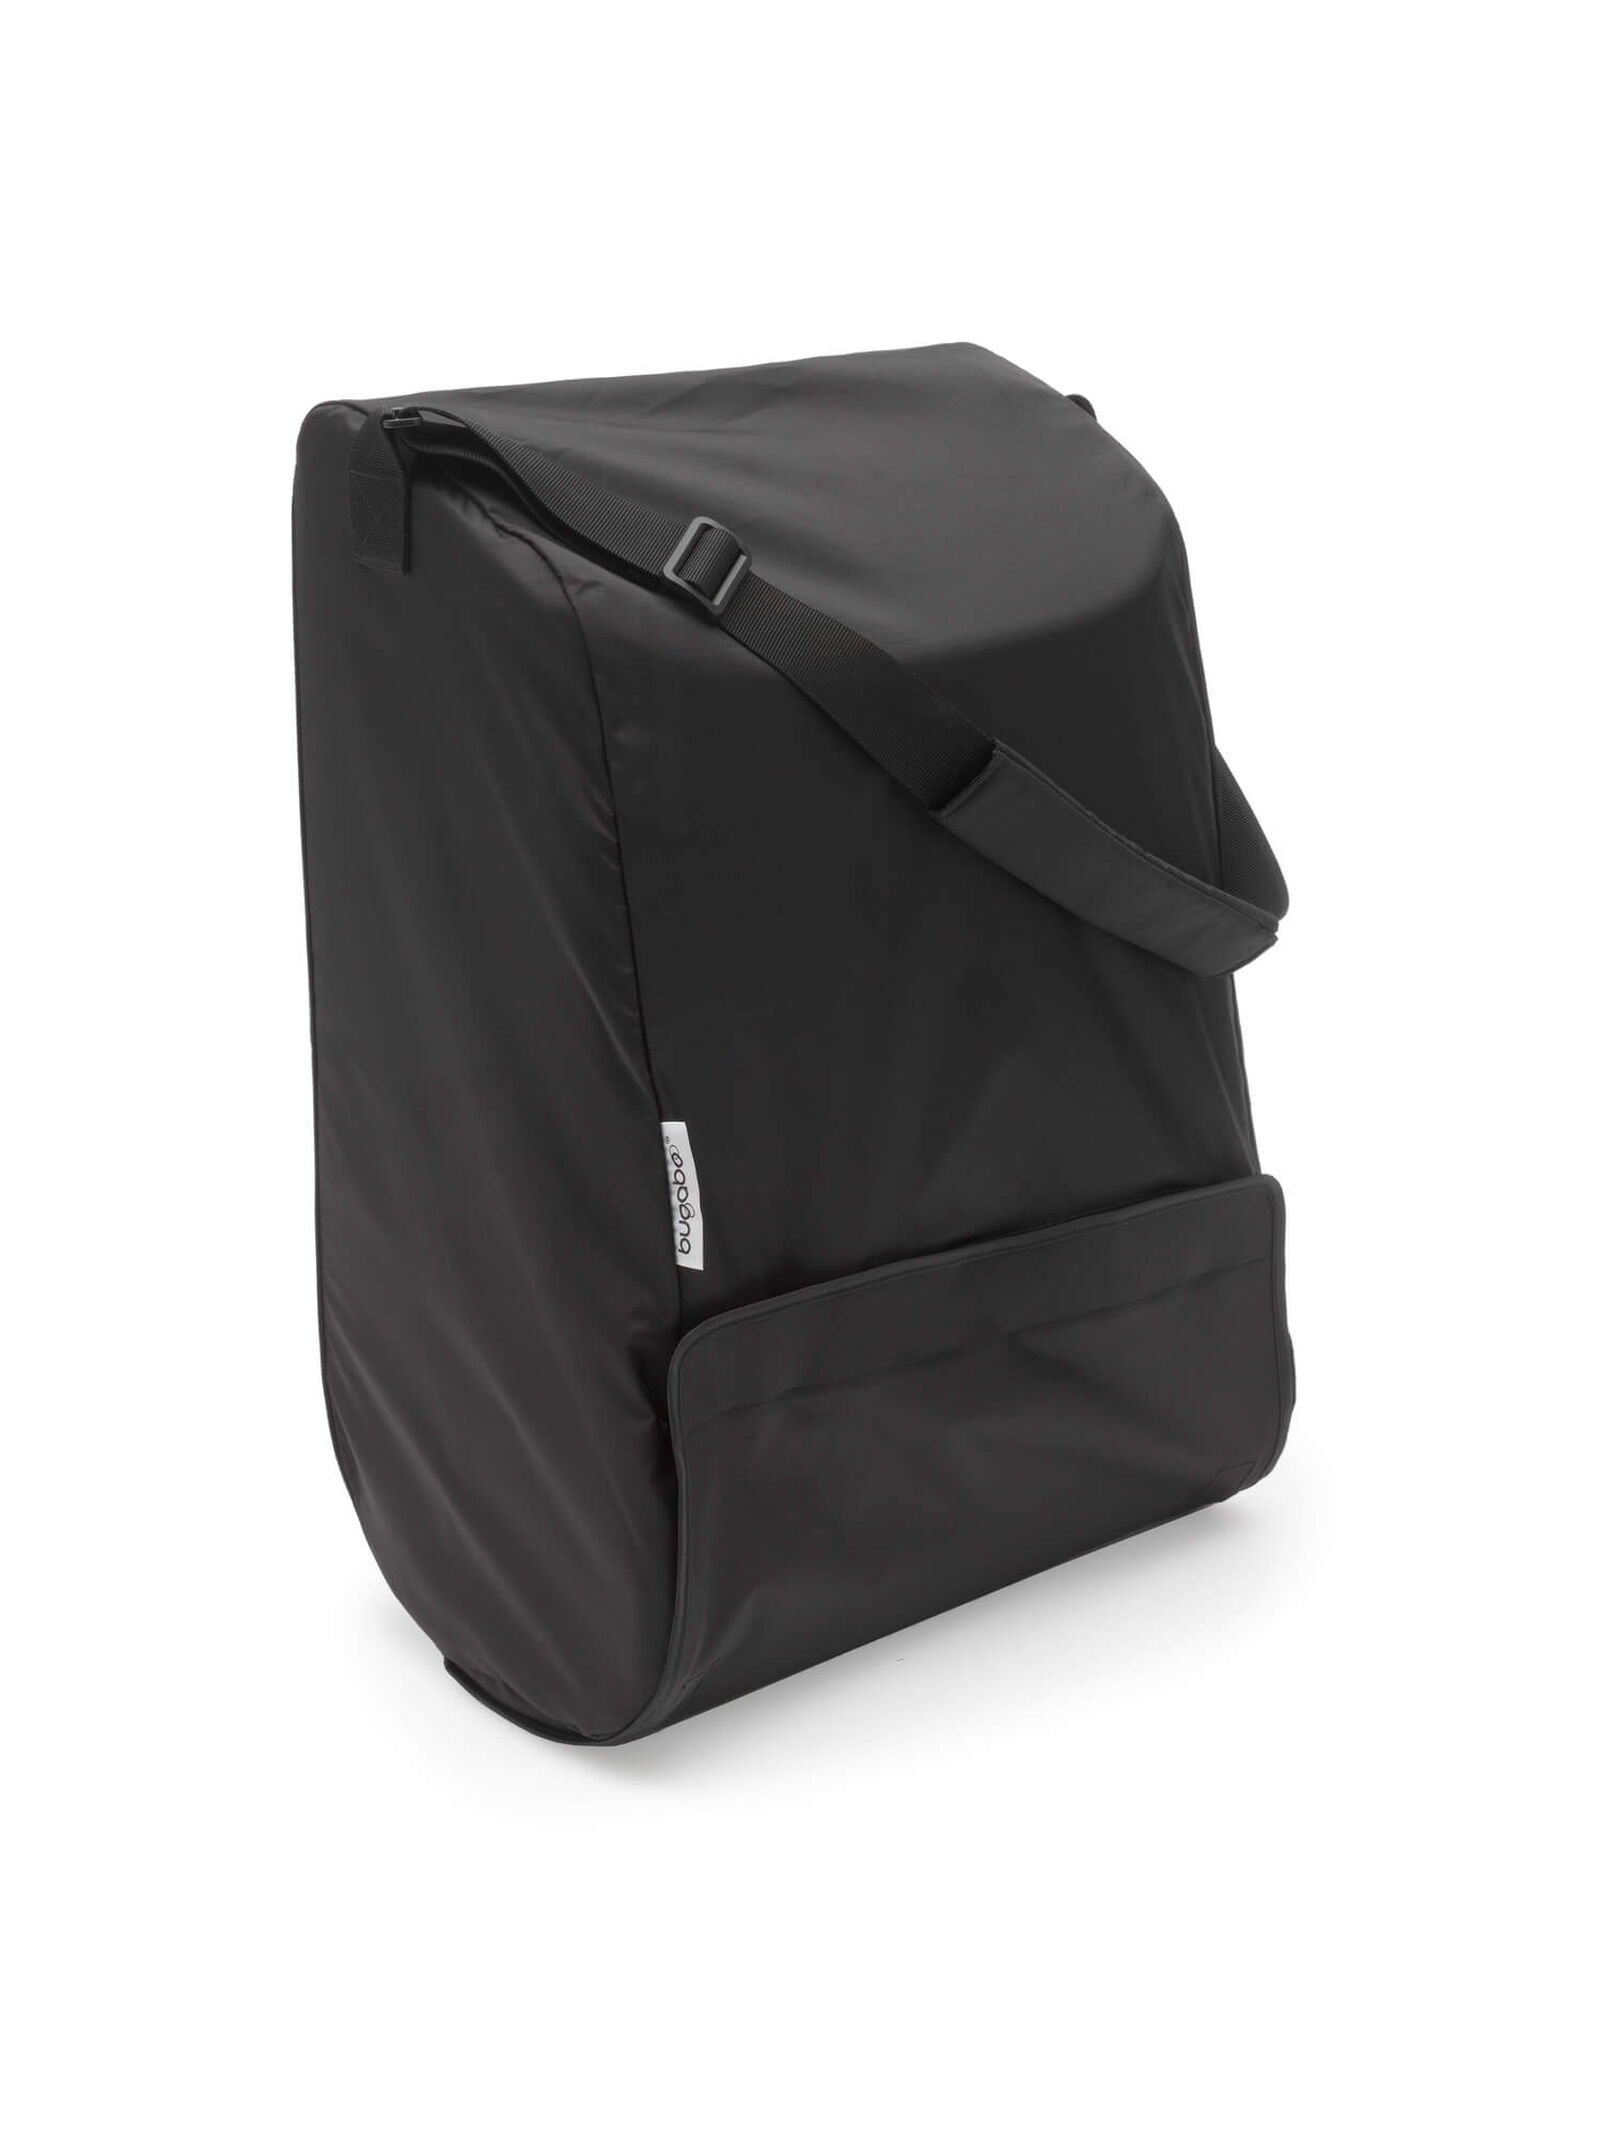 Bugaboo Ant transport bag - View 1